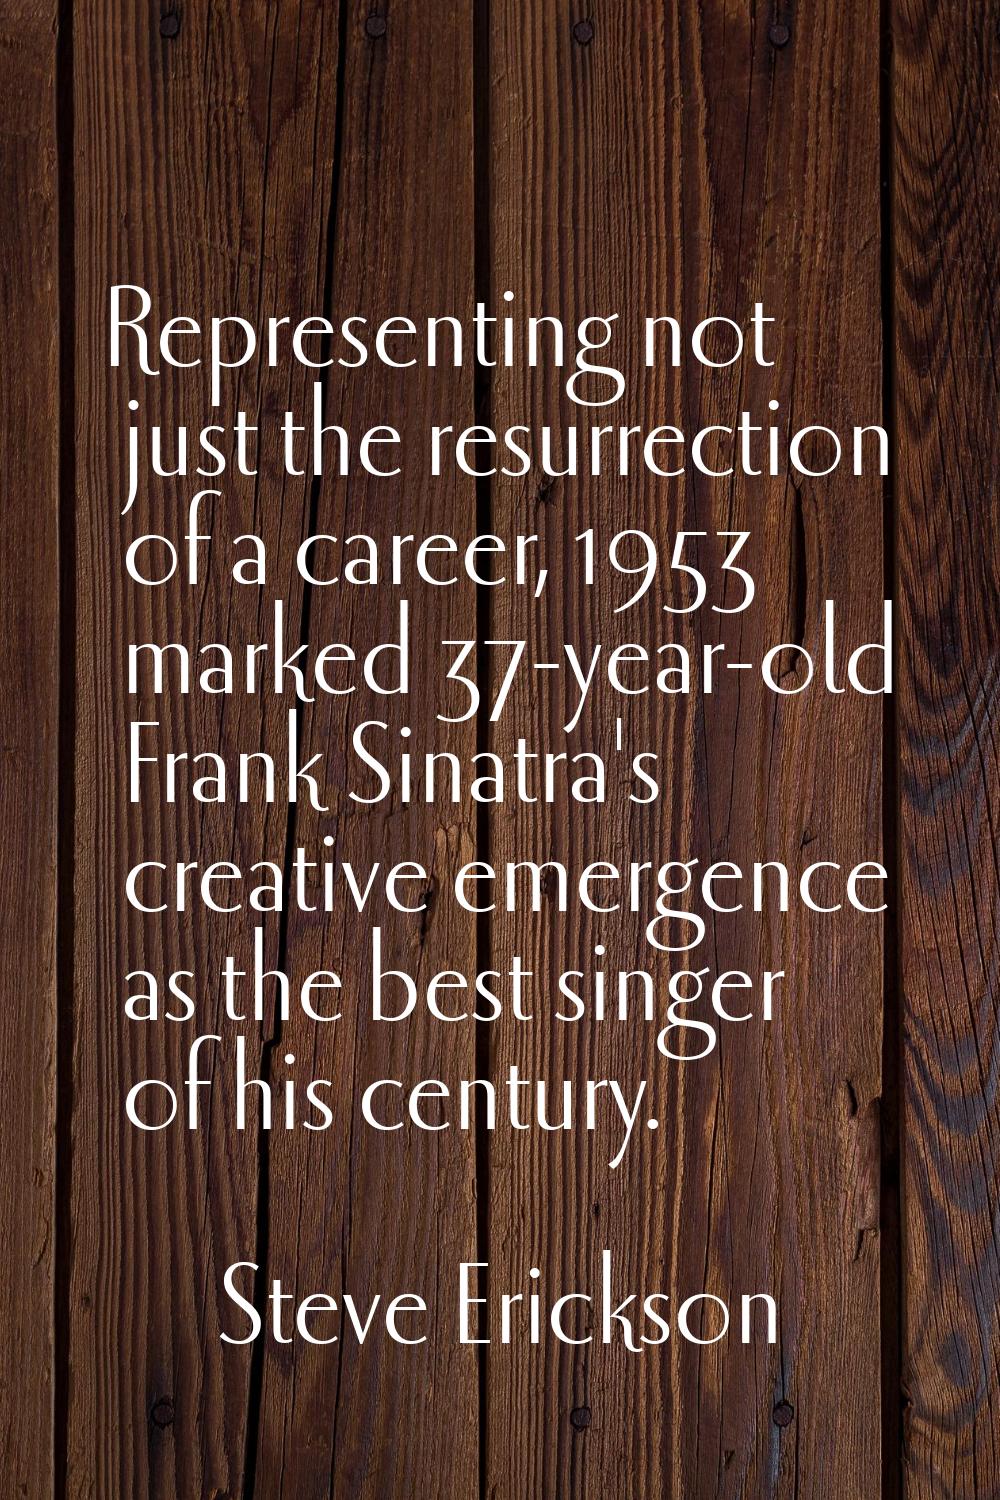 Representing not just the resurrection of a career, 1953 marked 37-year-old Frank Sinatra's creativ